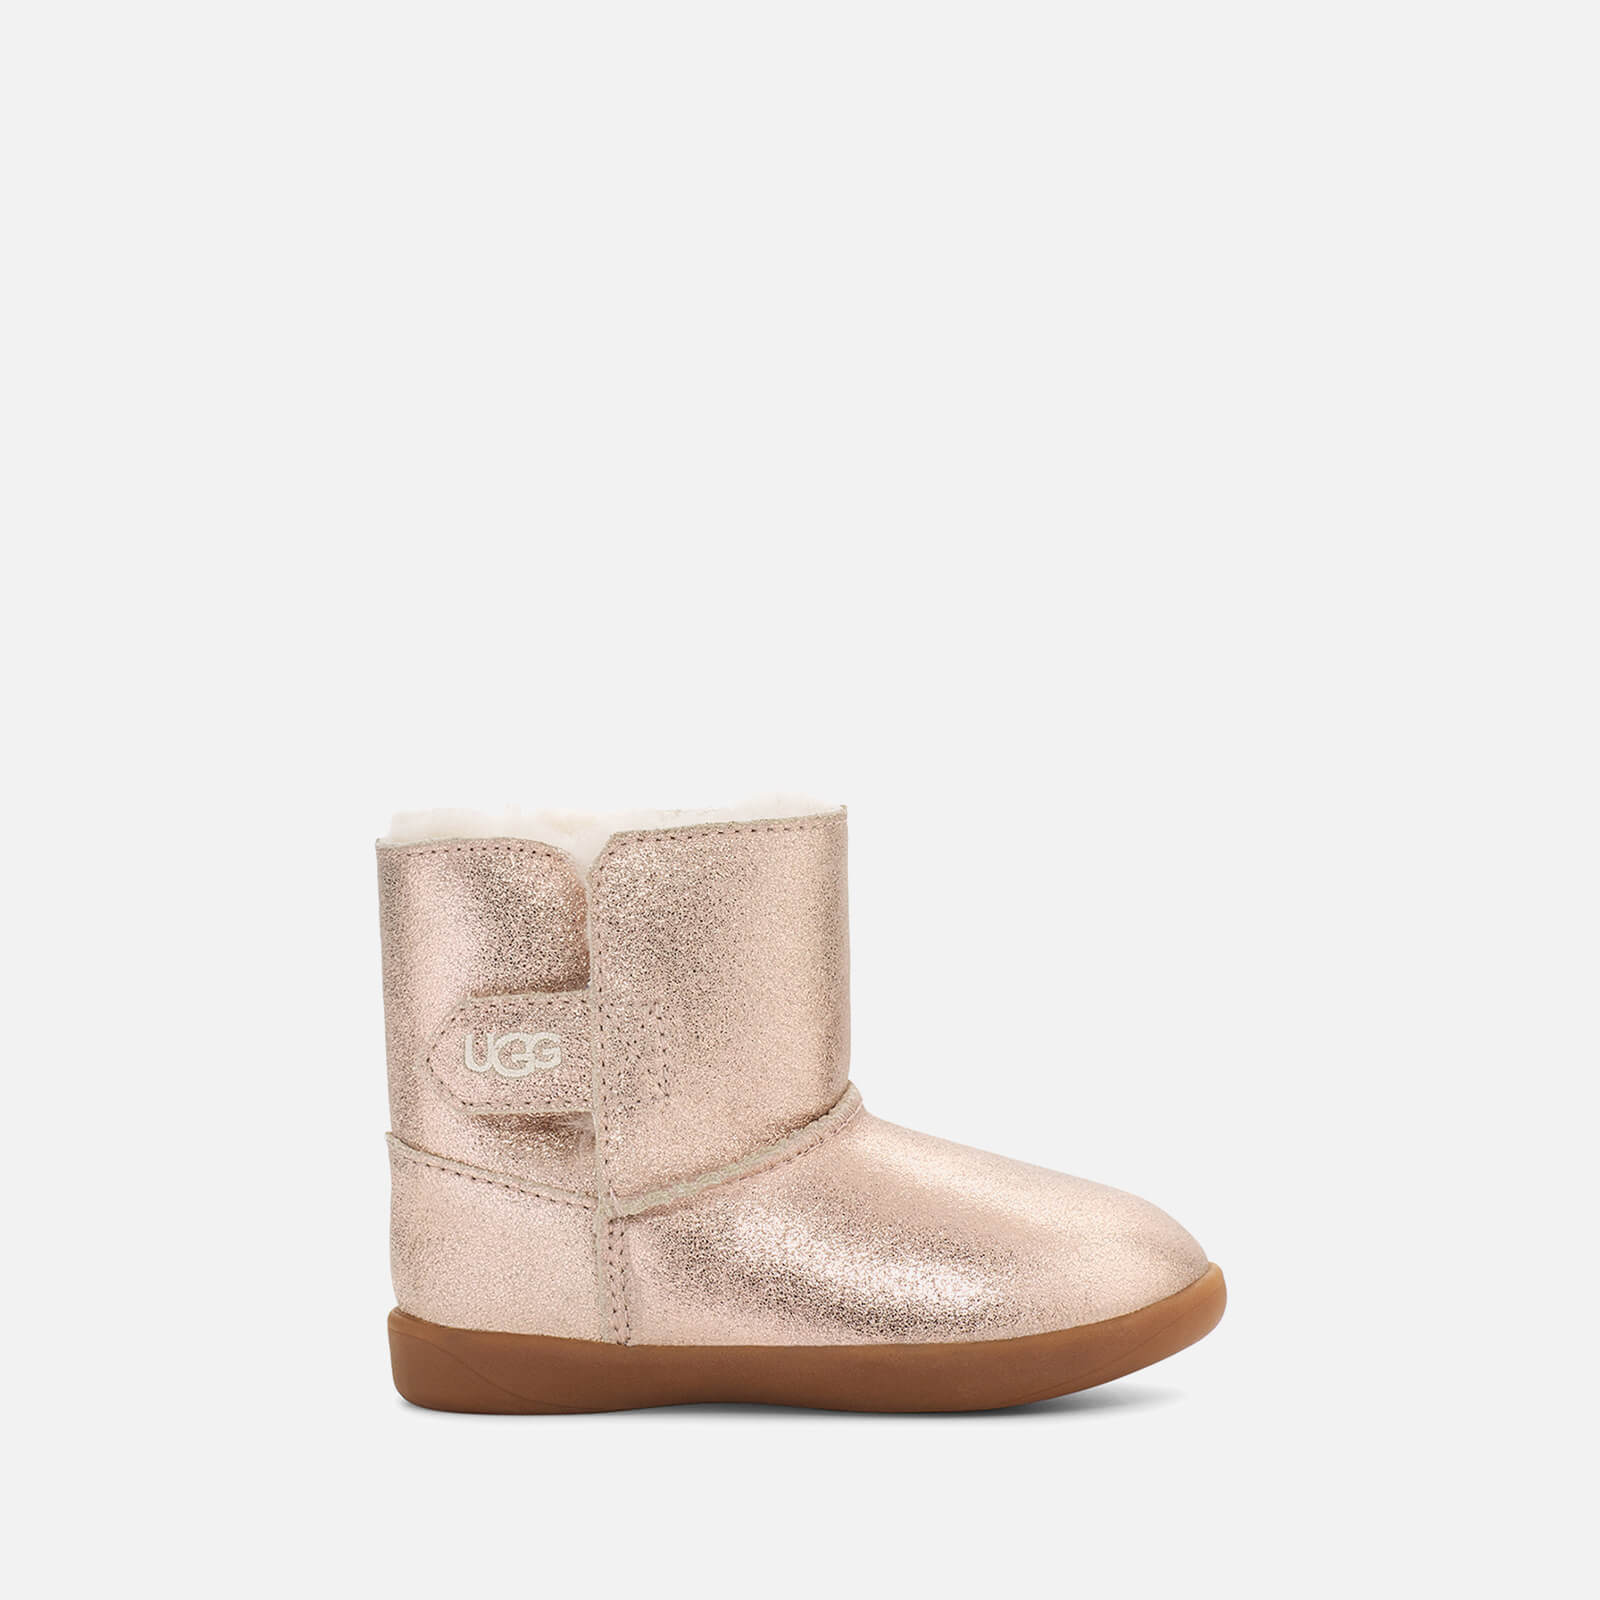 UGG Toddlers' Keelan Leather Boots